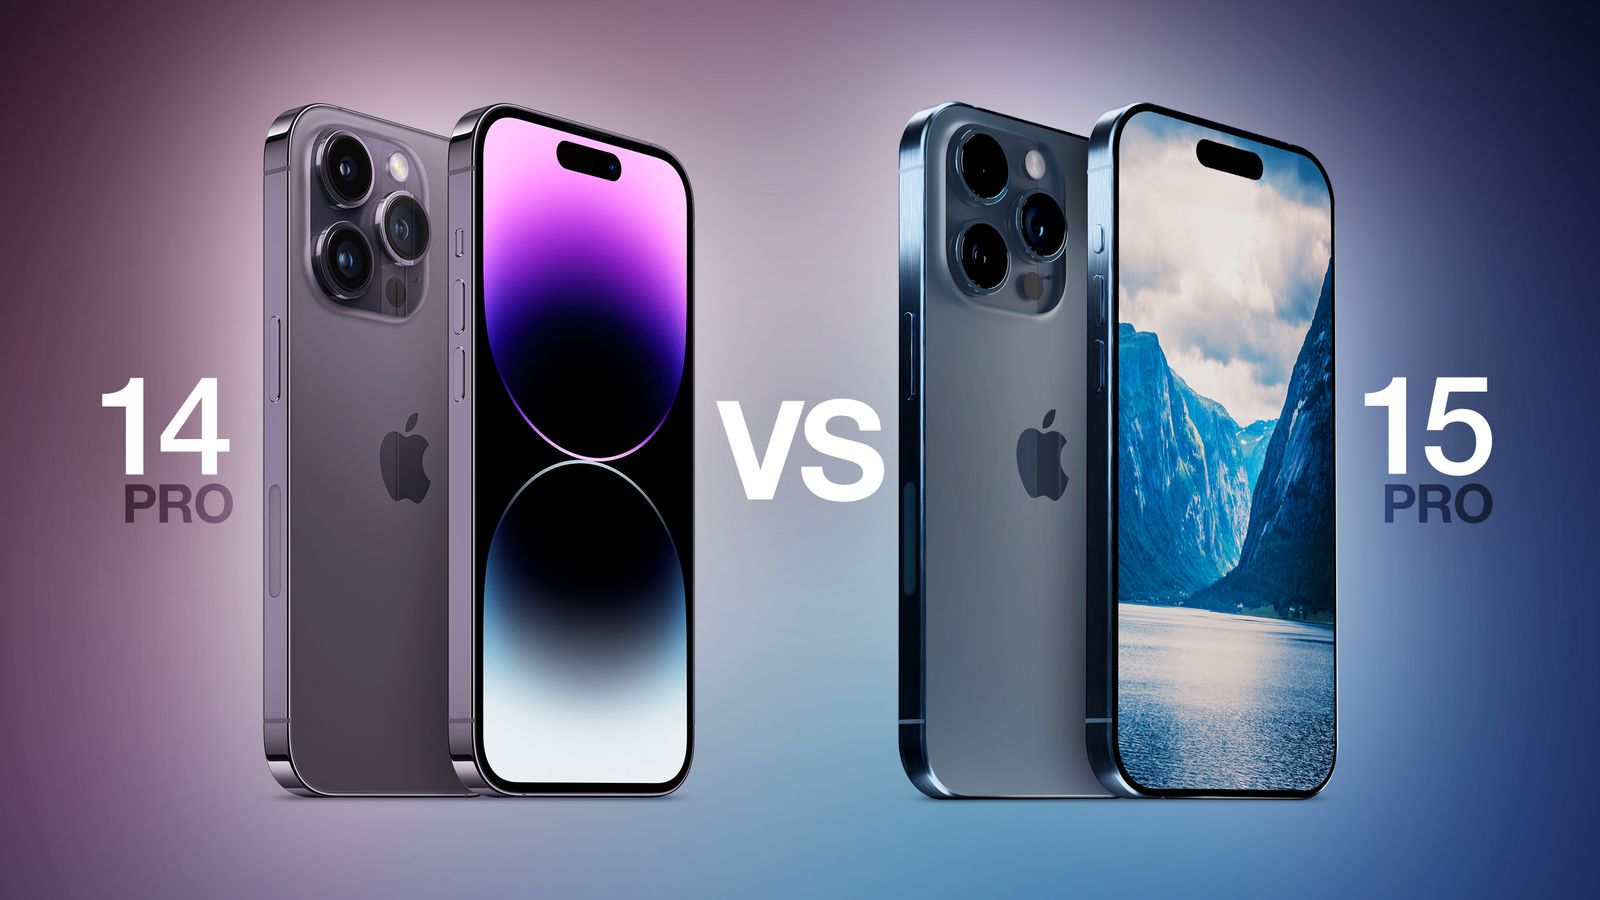 Apple iPhone 14 Pro vs iPhone 14: one is new, the other is not